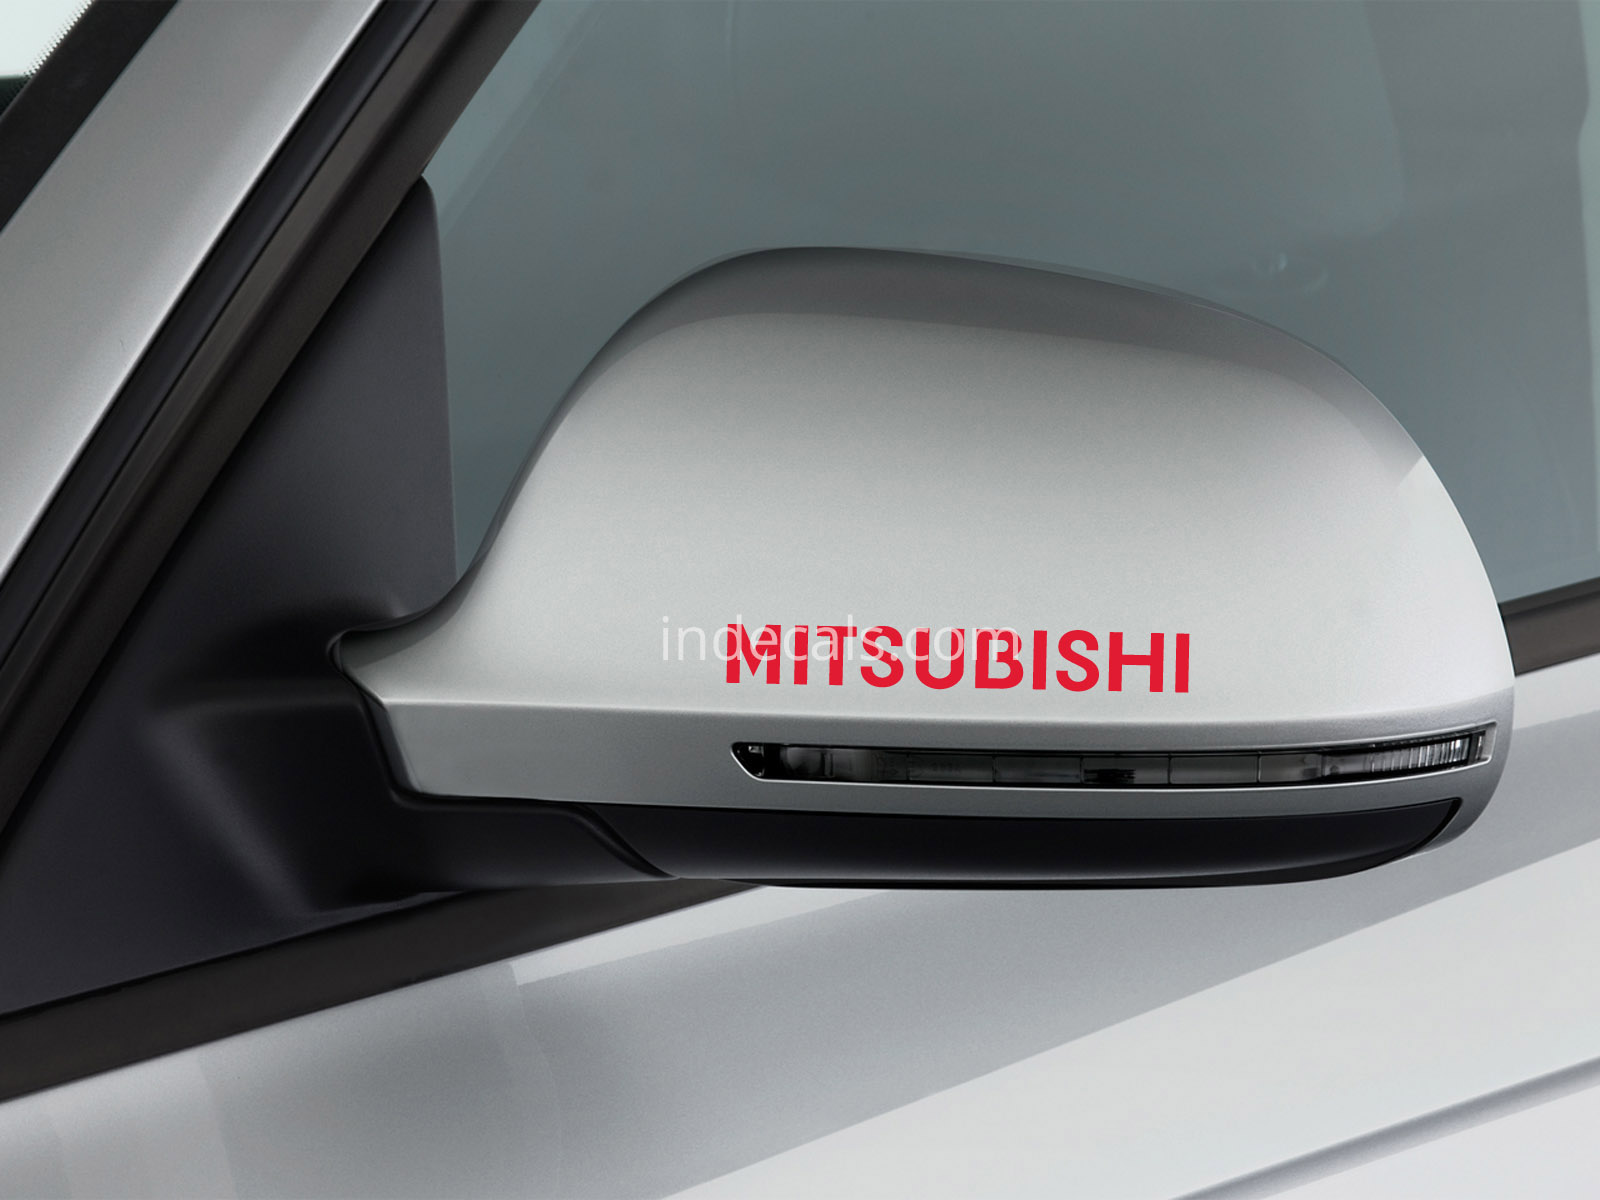 3 x Mitsubishi Stickers for Mirrors - Red